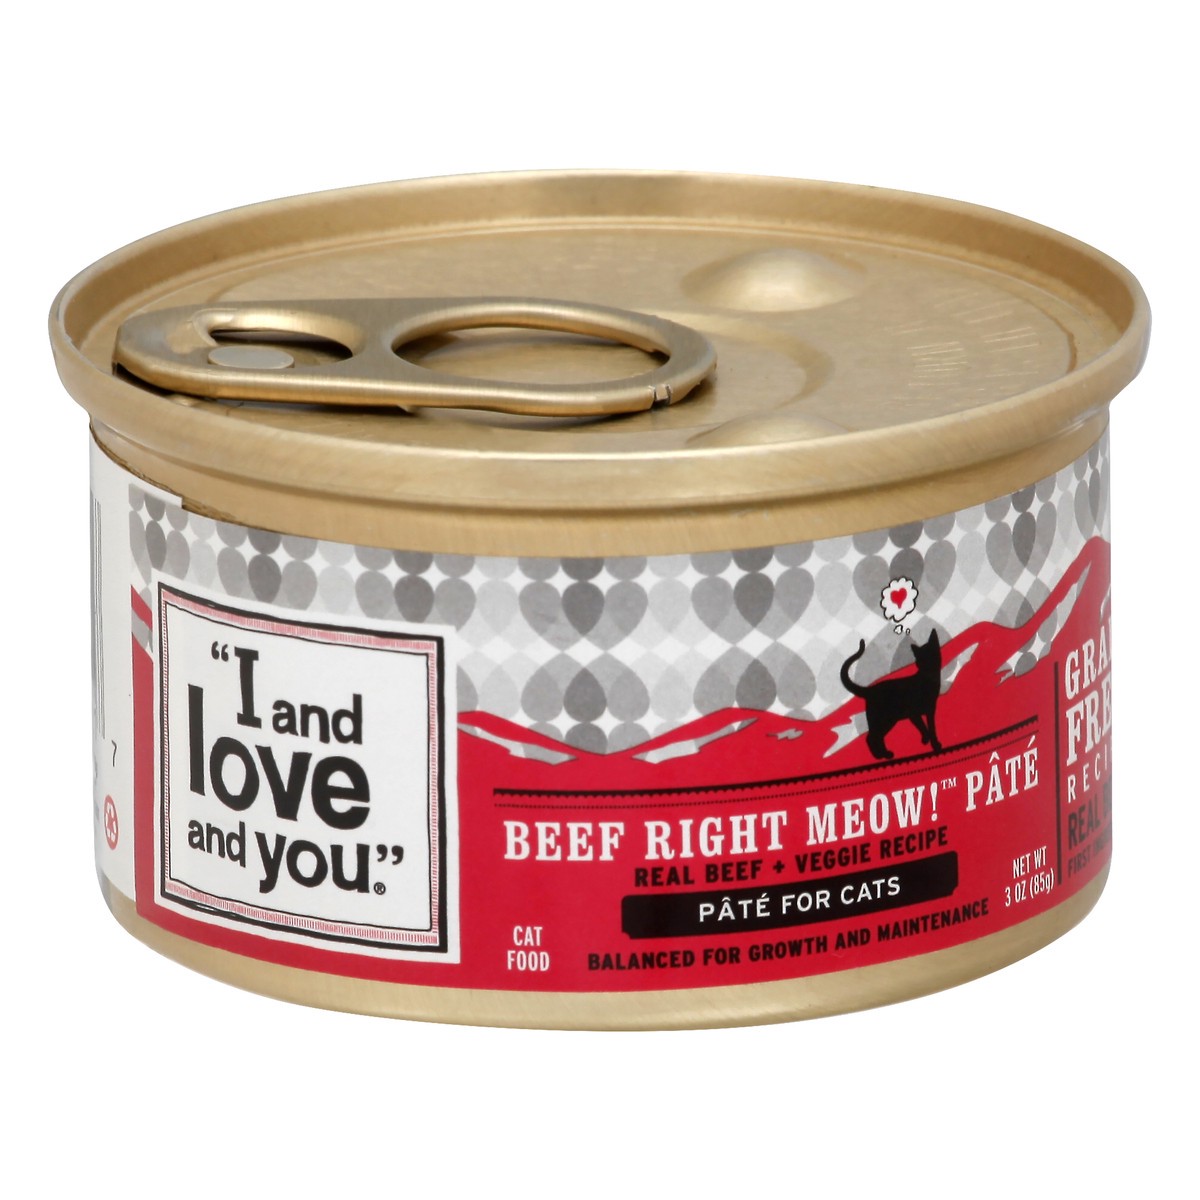 slide 7 of 11, I and Love and You Beef Right Meow! Pate Cat Food 3 oz, 24 ct; 3 oz